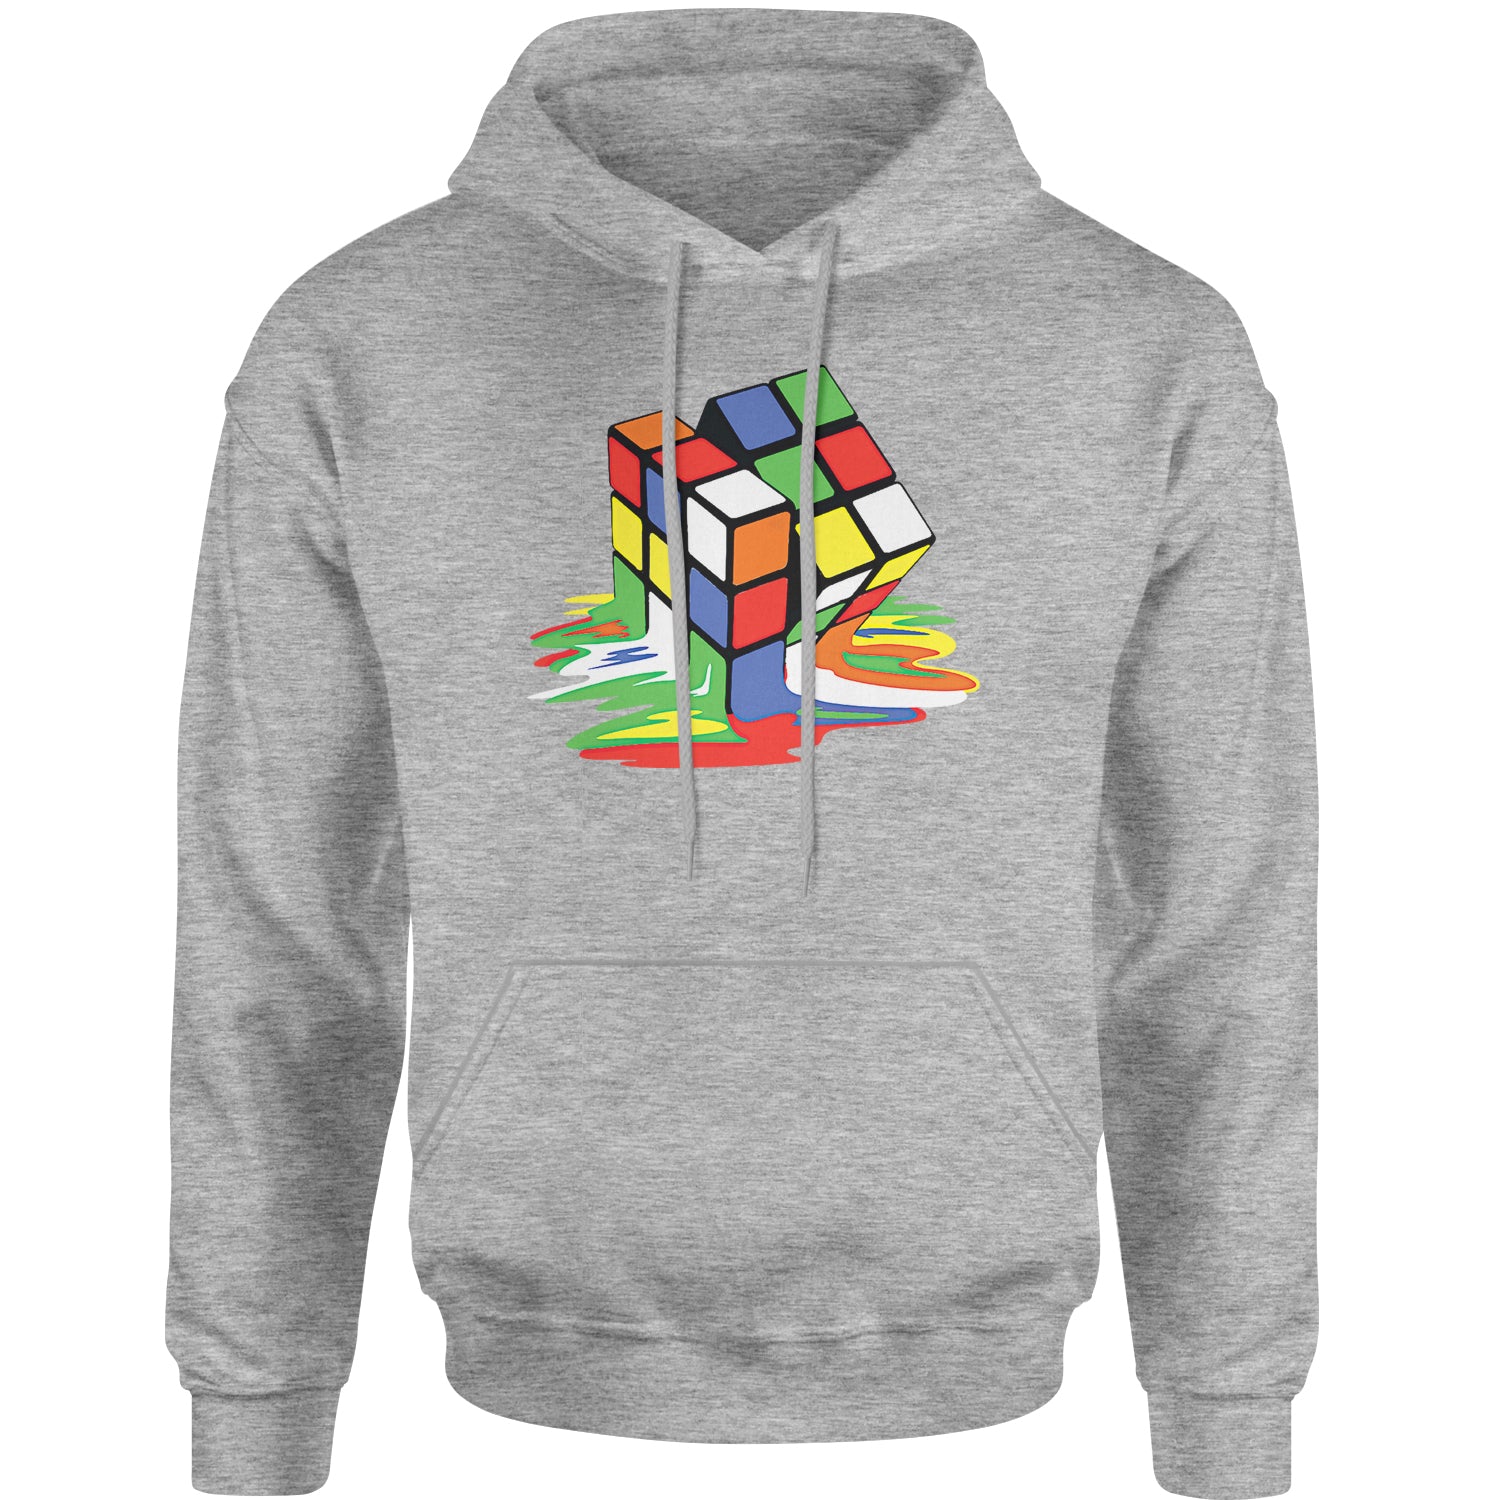 Melting Multi-Colored Cube Adult Hoodie Sweatshirt gamer, gaming, nerd, shirt by Expression Tees